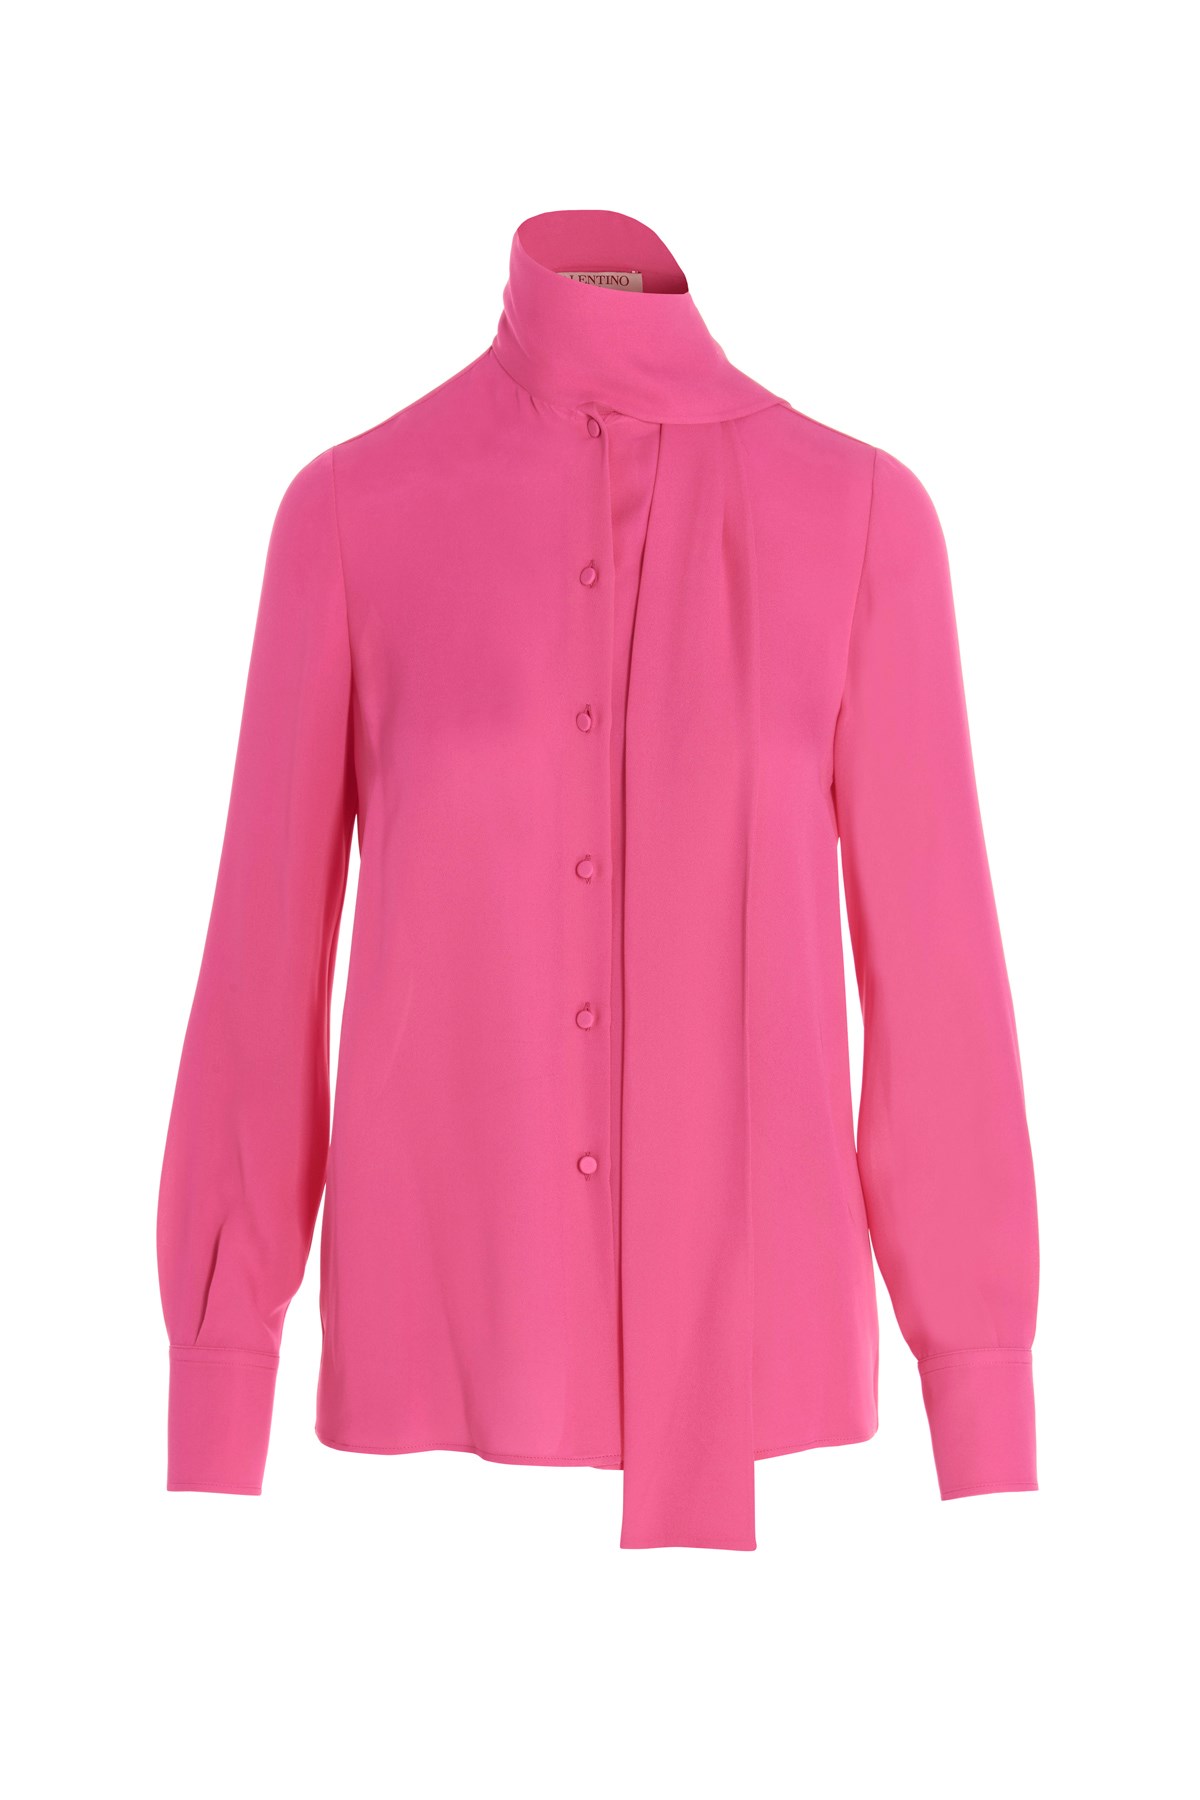 VALENTINO Pussy Bow Blouse